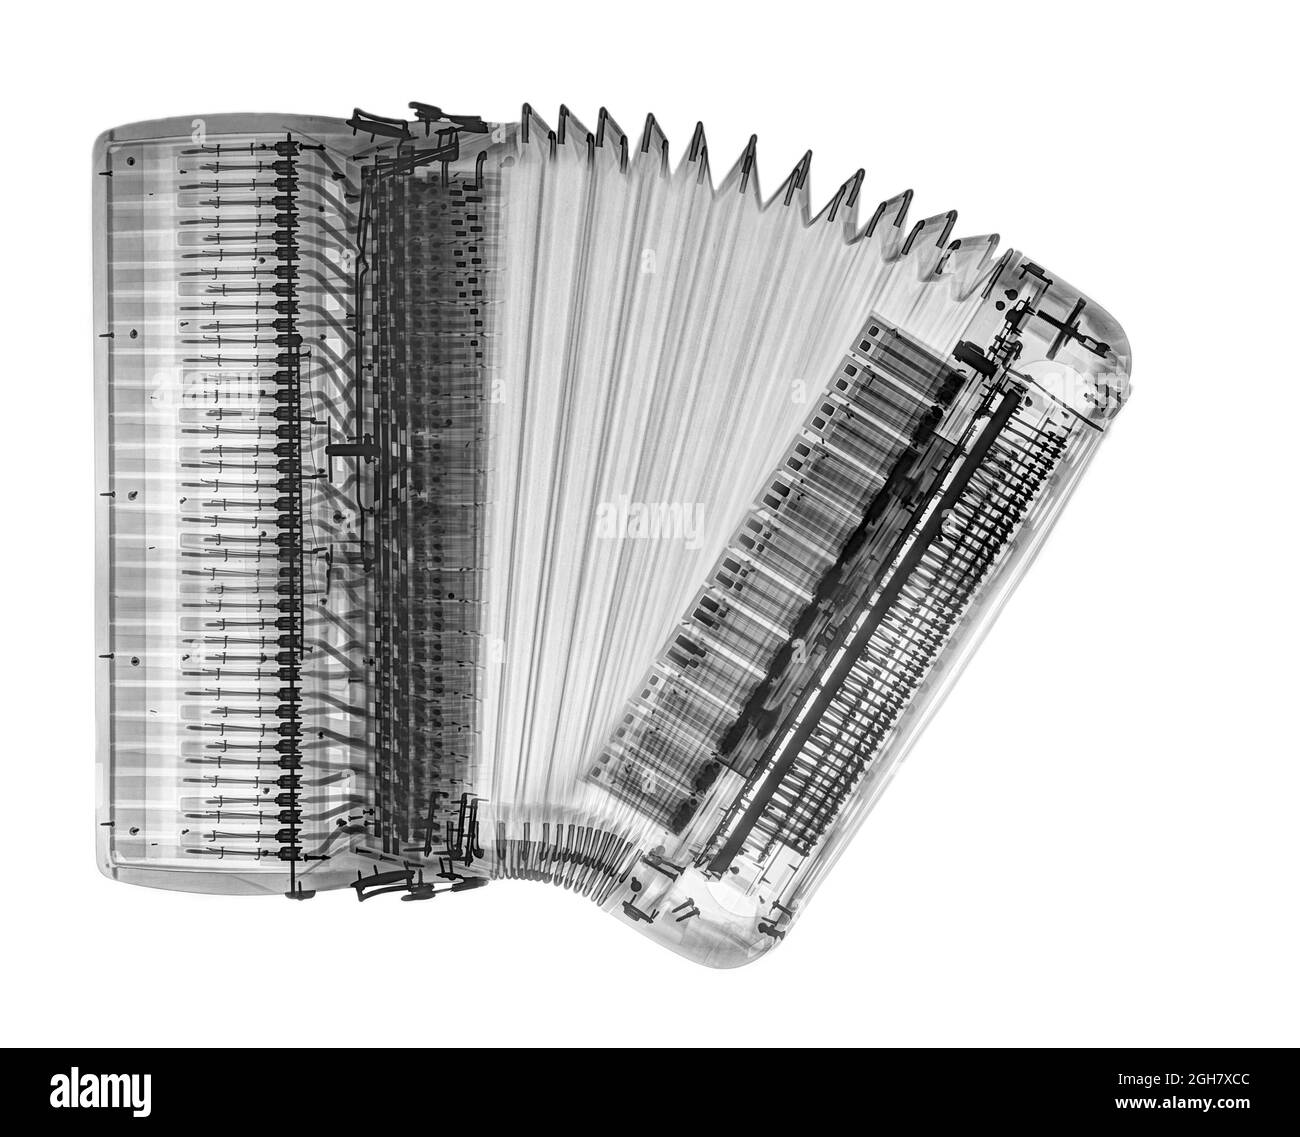 X-ray of an Accordion on white background Stock Photo